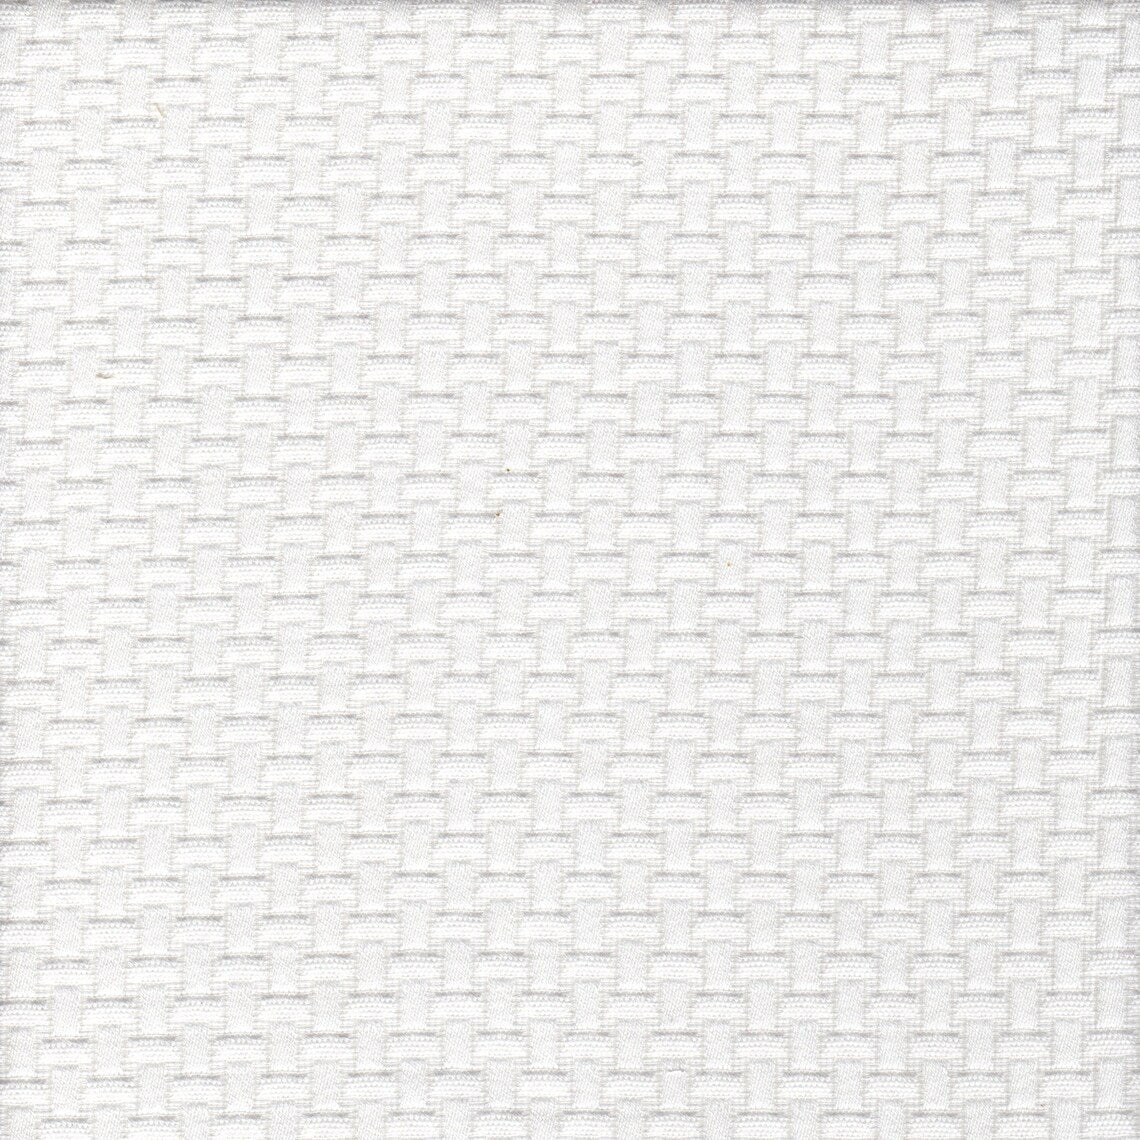 Pinch Pleated Curtain Panels Pair in Basketry Antique White Basket Weave Matelasse - Small Scale